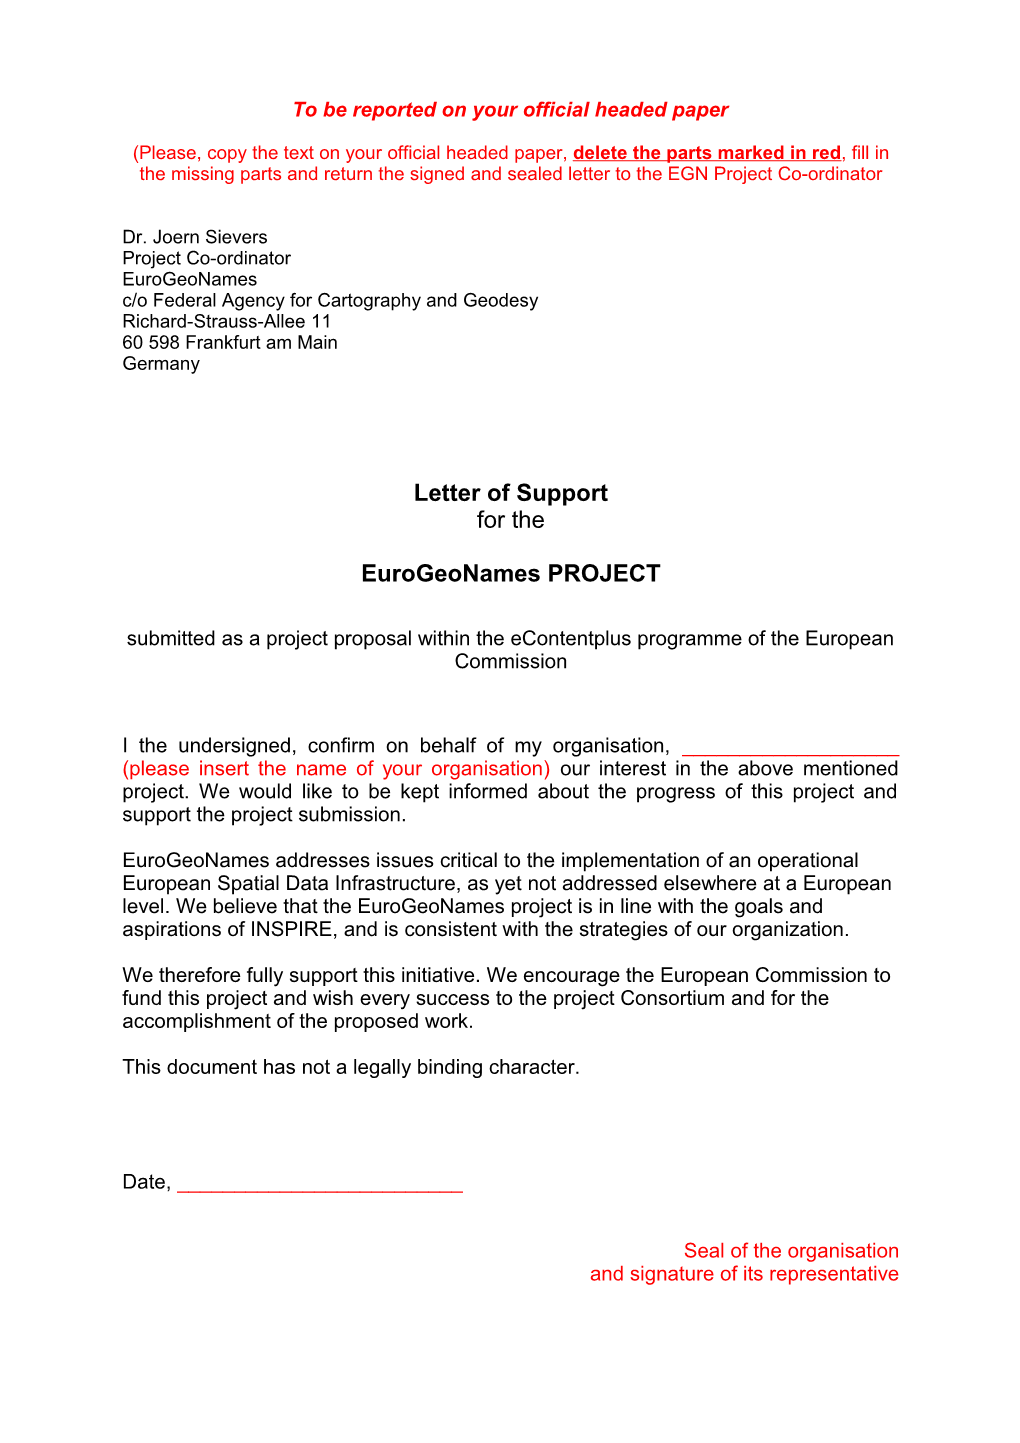 Letter of Intent for the Participation in the Project